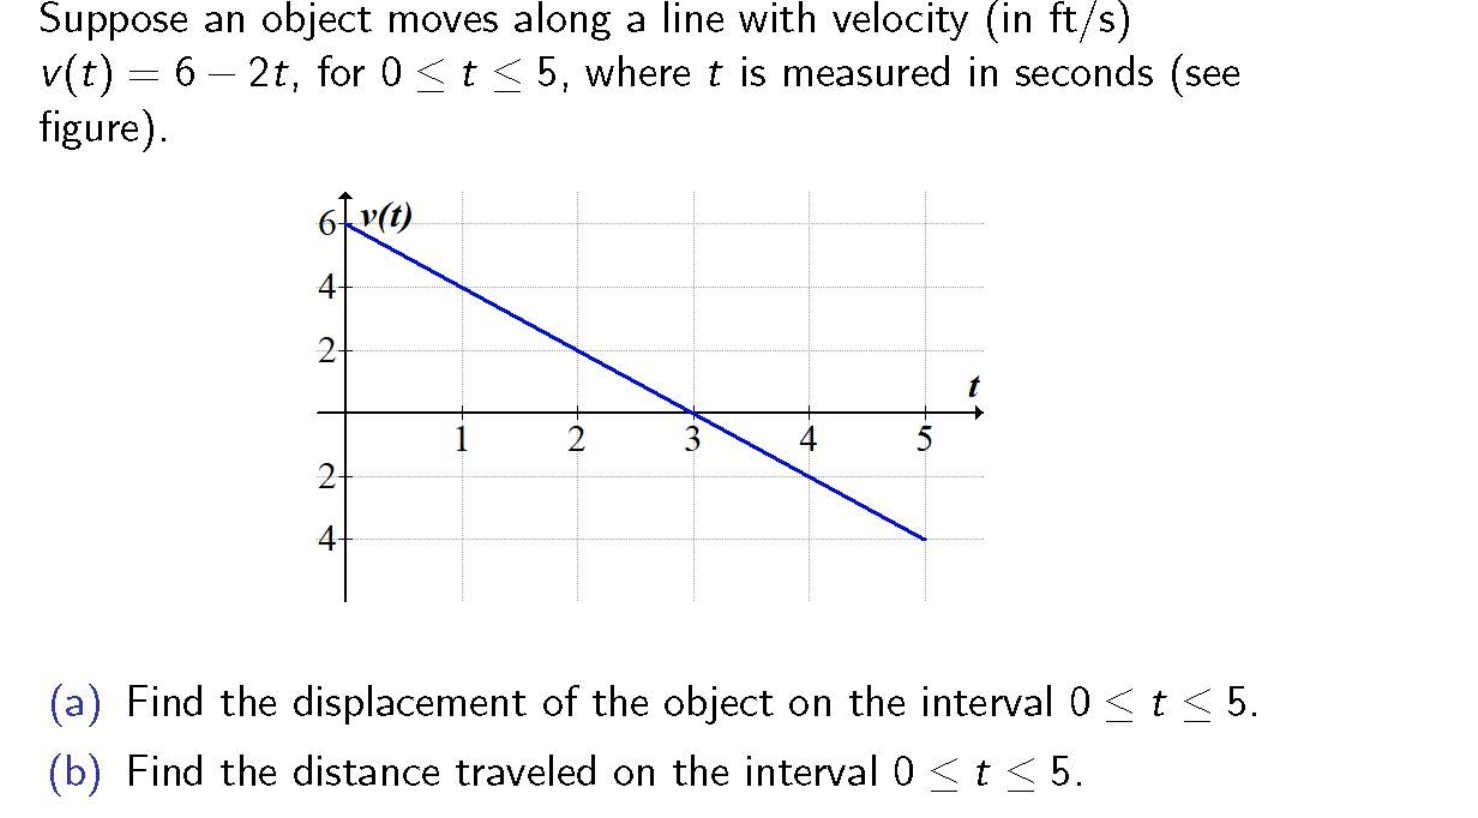 Suppose an object moves along a line with velocity (in ft/s)
v(t) = 6 – 2t, for 0 <t< 5, where t is measured in seconds (see
figure).
6 v(t)
4-
2-
1
4
5
2-
(a) Find the displacement of the object on the interval 0 <t<5
(b) Find the distance traveled on the interval 0 <t <5.
3.
4+
